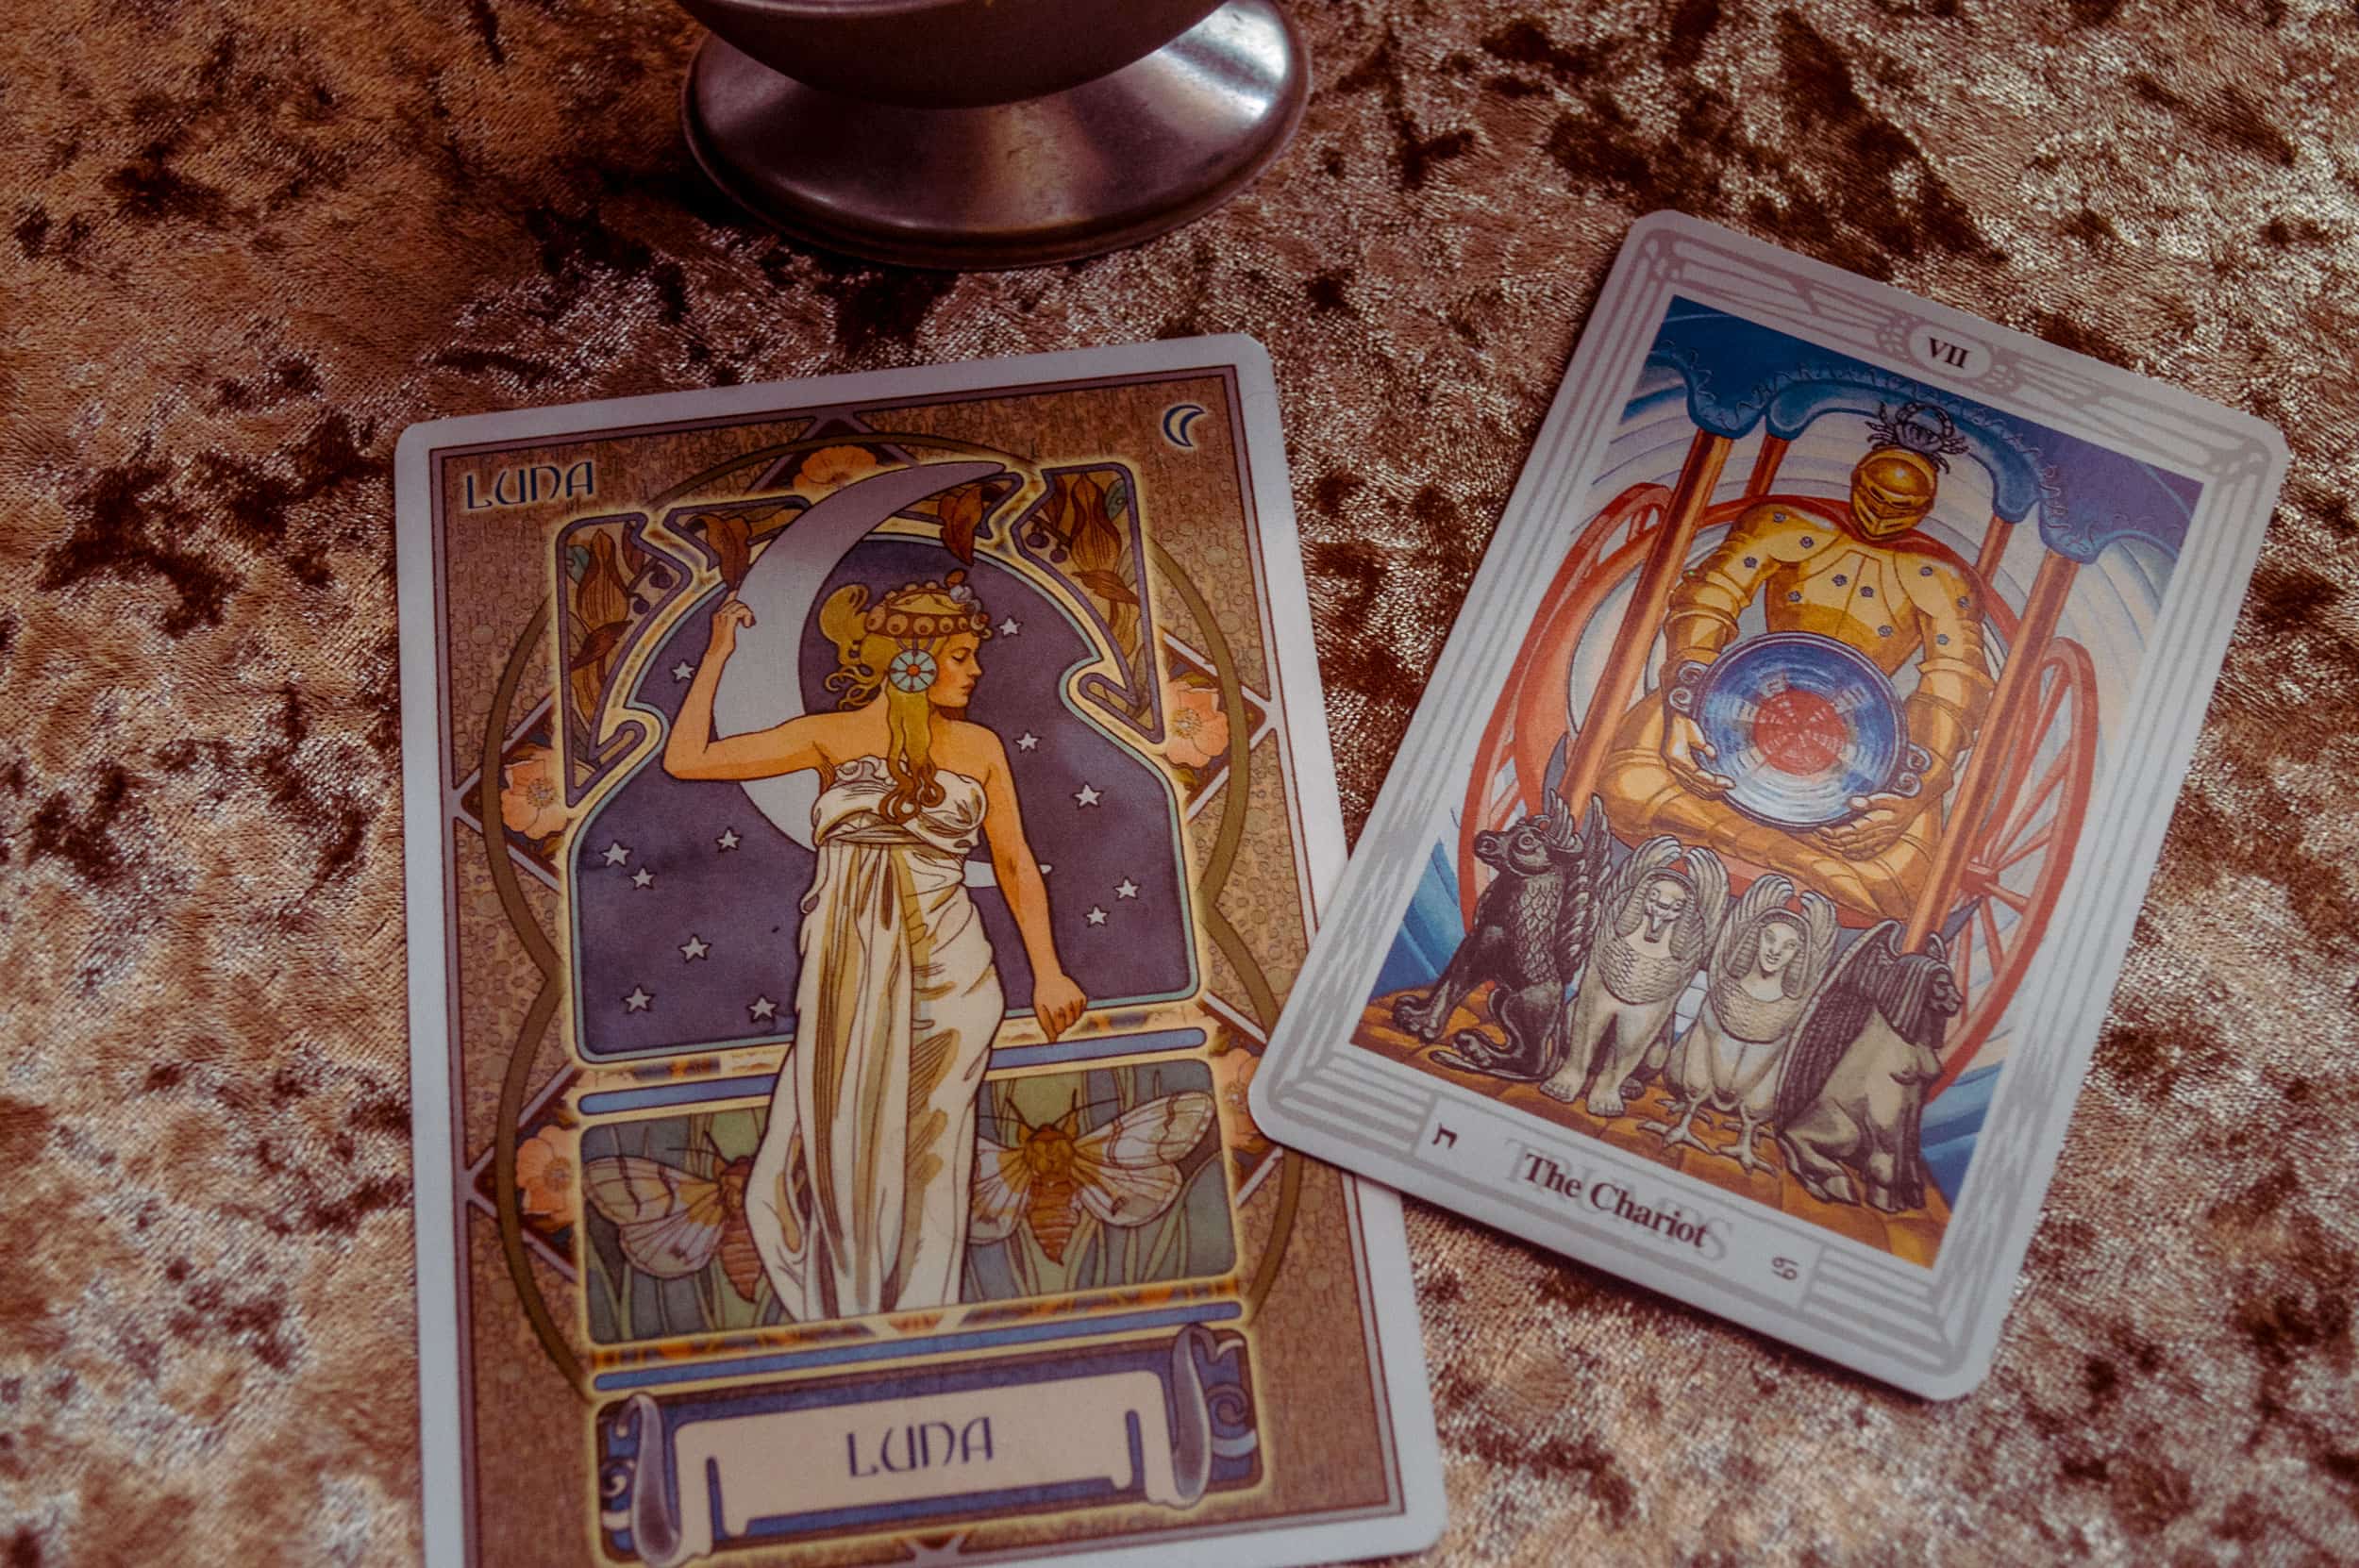 Cancer Power Card: The Chariot Use your intuition to see the best course for moving forward. Your armor will protect you, but you must find the balance between the exterior and the emotions. From the Astrological Oracle and Crowley Thoth decks.